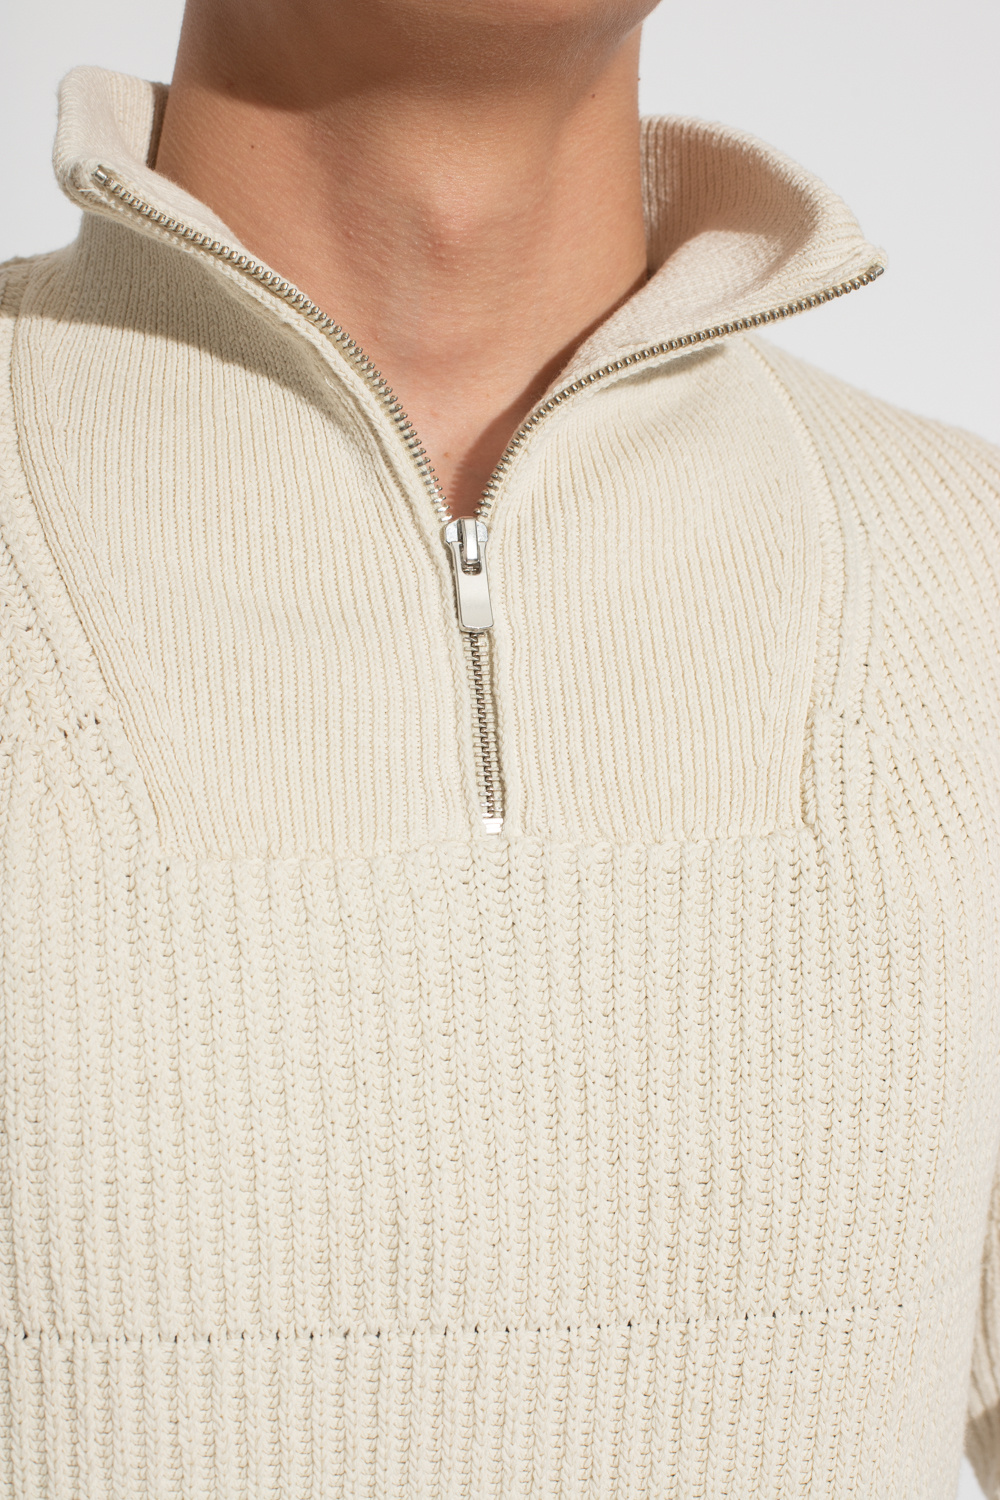 Jacquemus ‘Doce’ sweater Portugal with standing collar